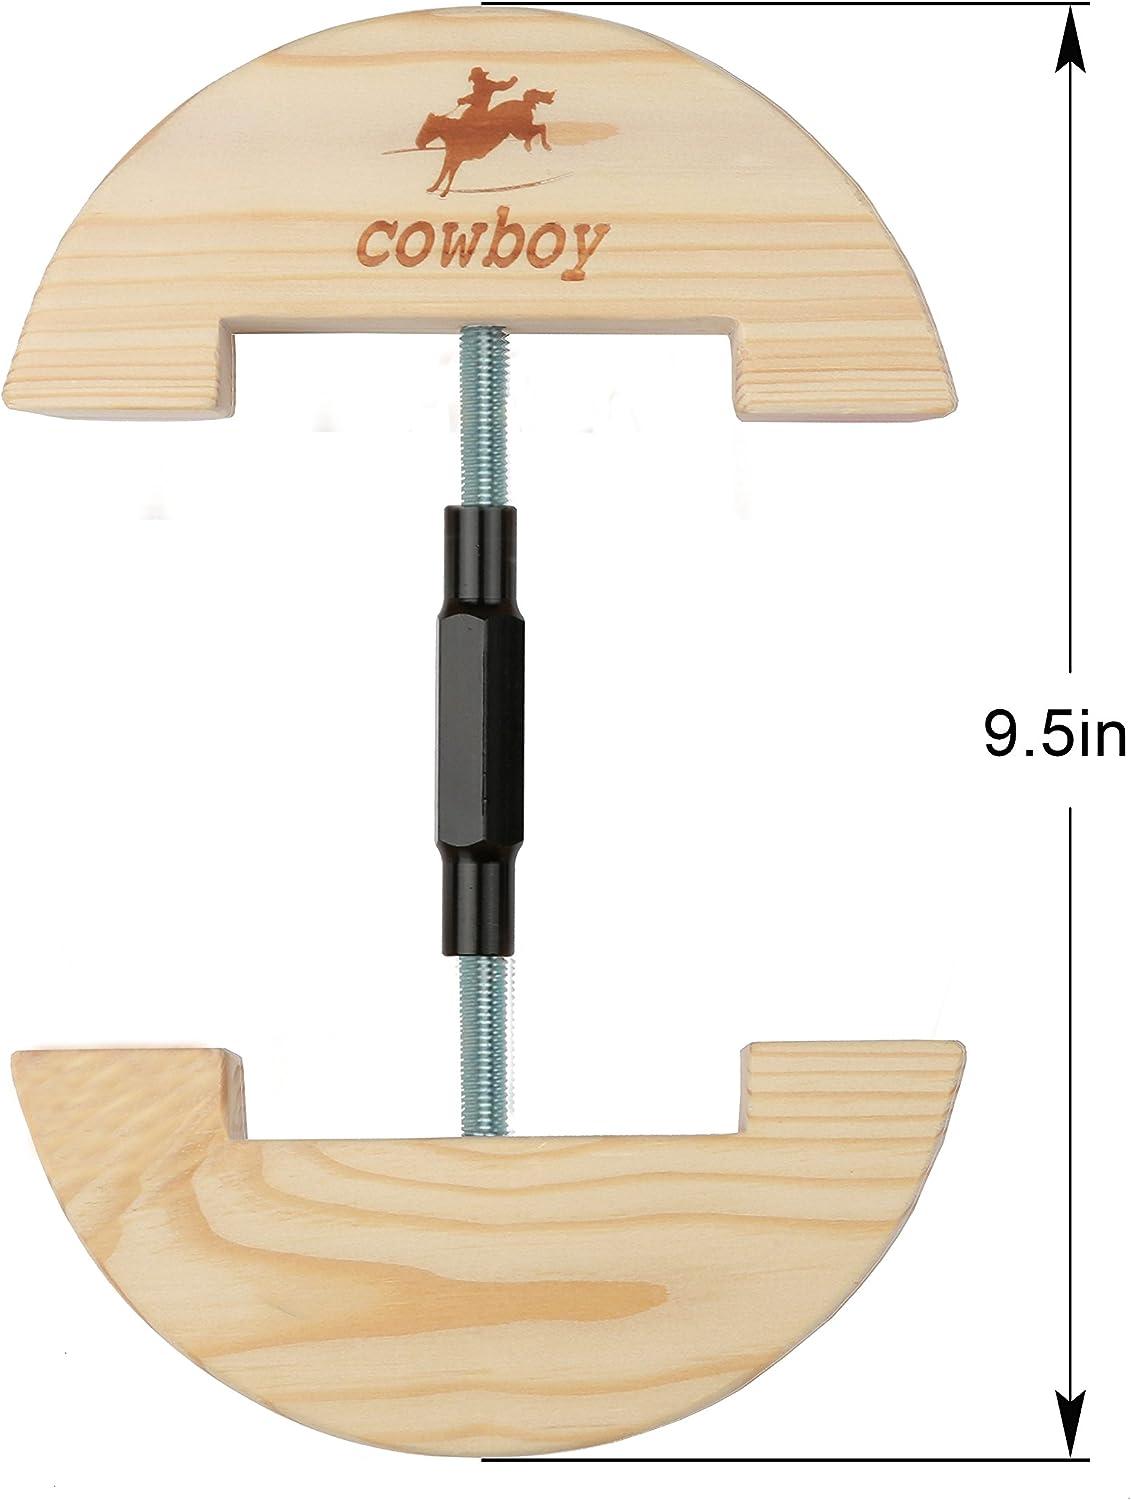 Cowboy Hat Stretcher Small Size 6 1/2 to 9 1/2-Colourful Adjustable Buckle Heavy Duty (Small Black)